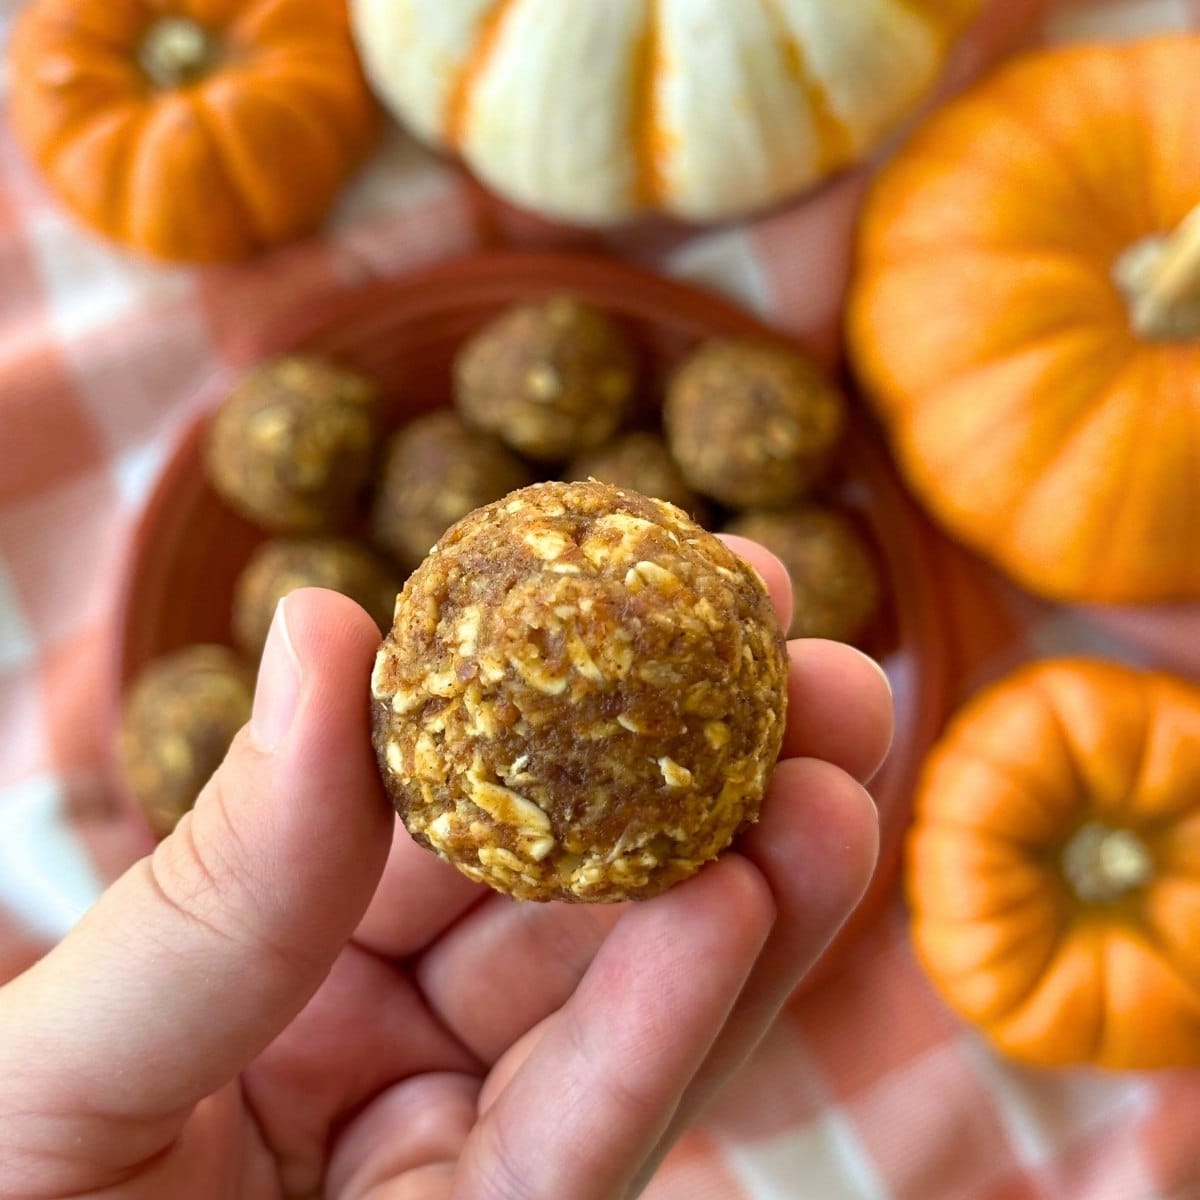 A hand holding 1 pumpkin protein ball. In the background there is a plate of the balls with 4 pumpkins surrounding it.